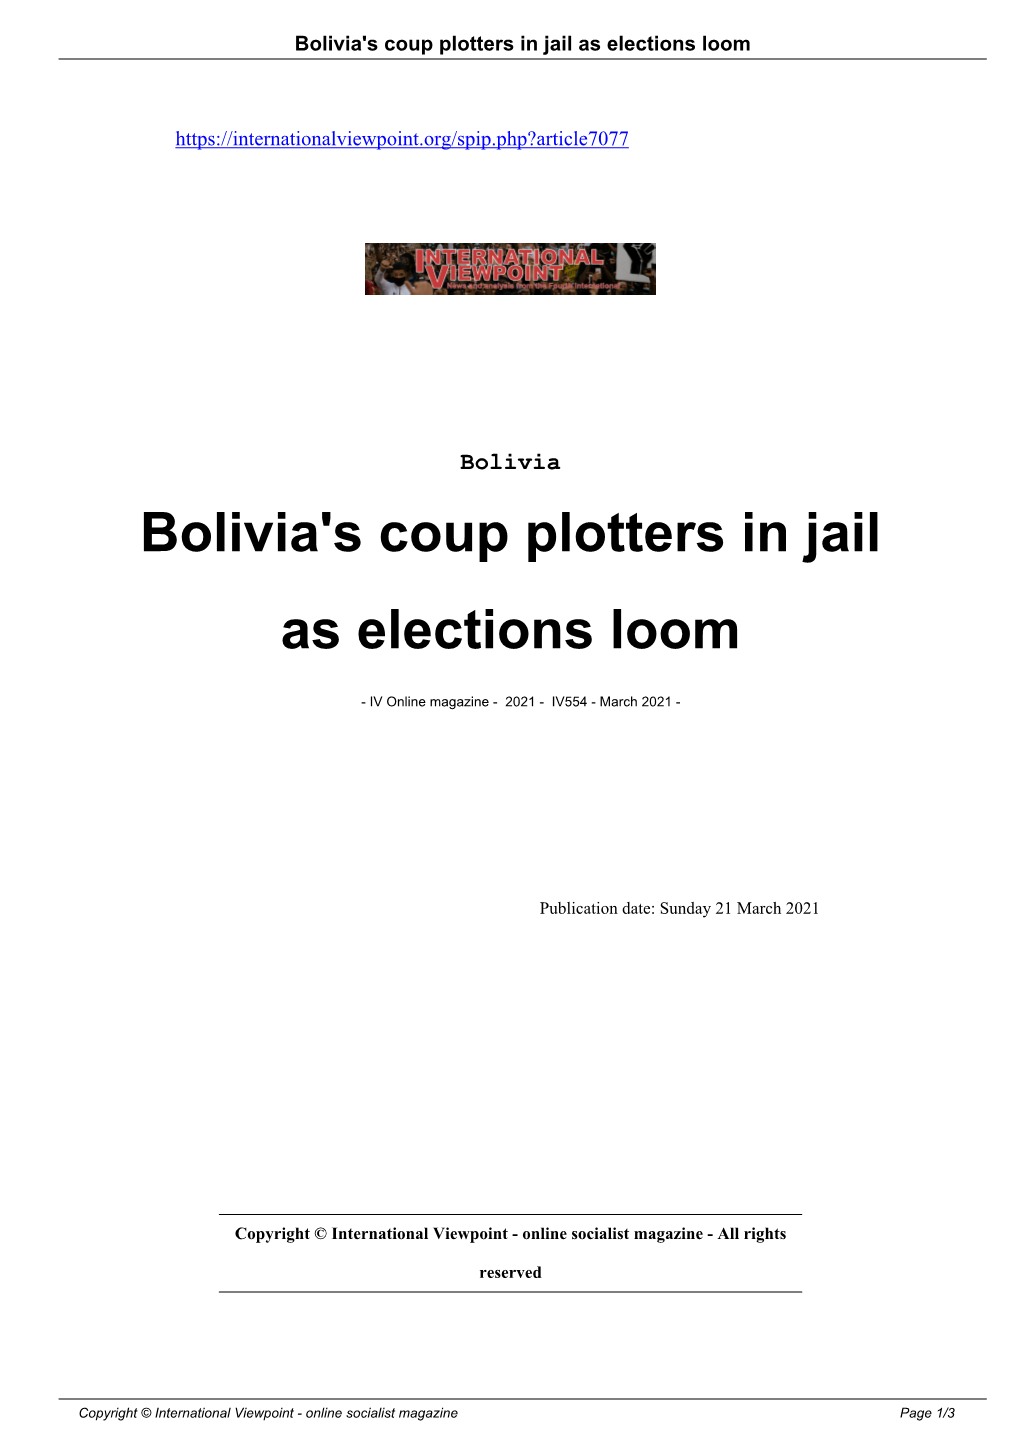 Bolivia's Coup Plotters in Jail As Elections Loom